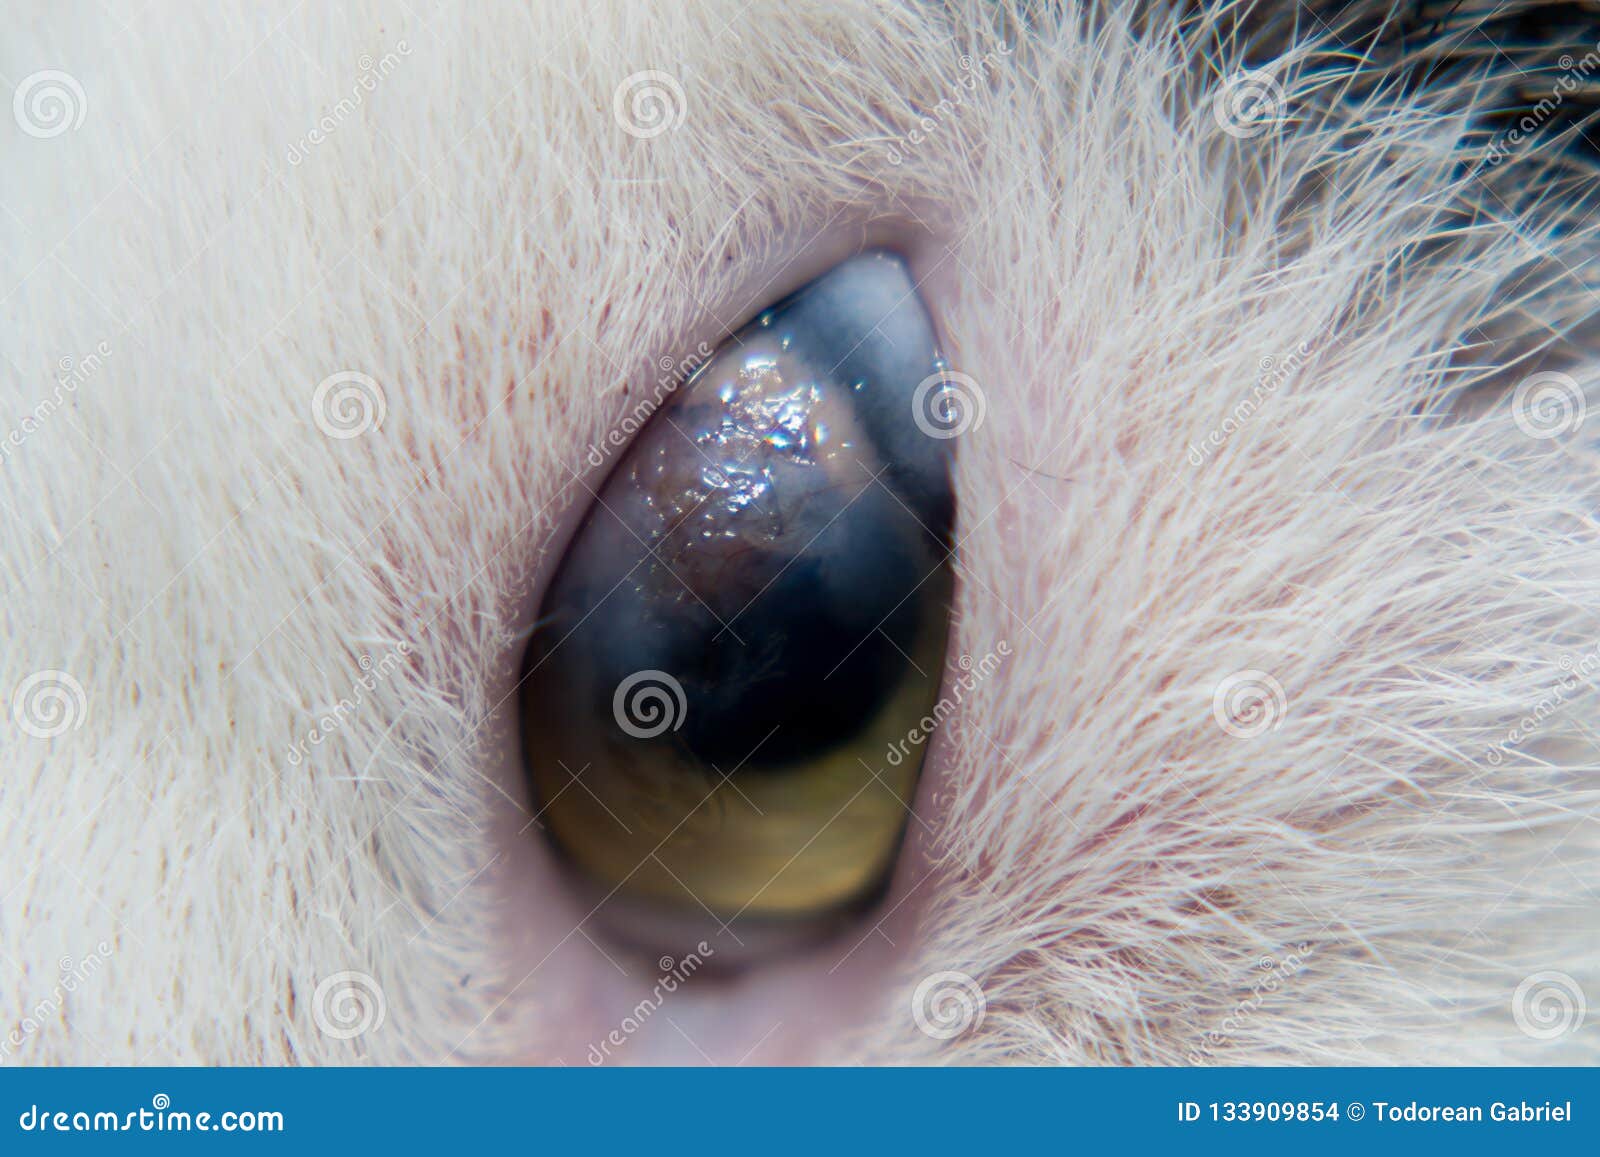 Adult Cat With Corneal Ulcer Stock Photo Image of front, adult 133909854